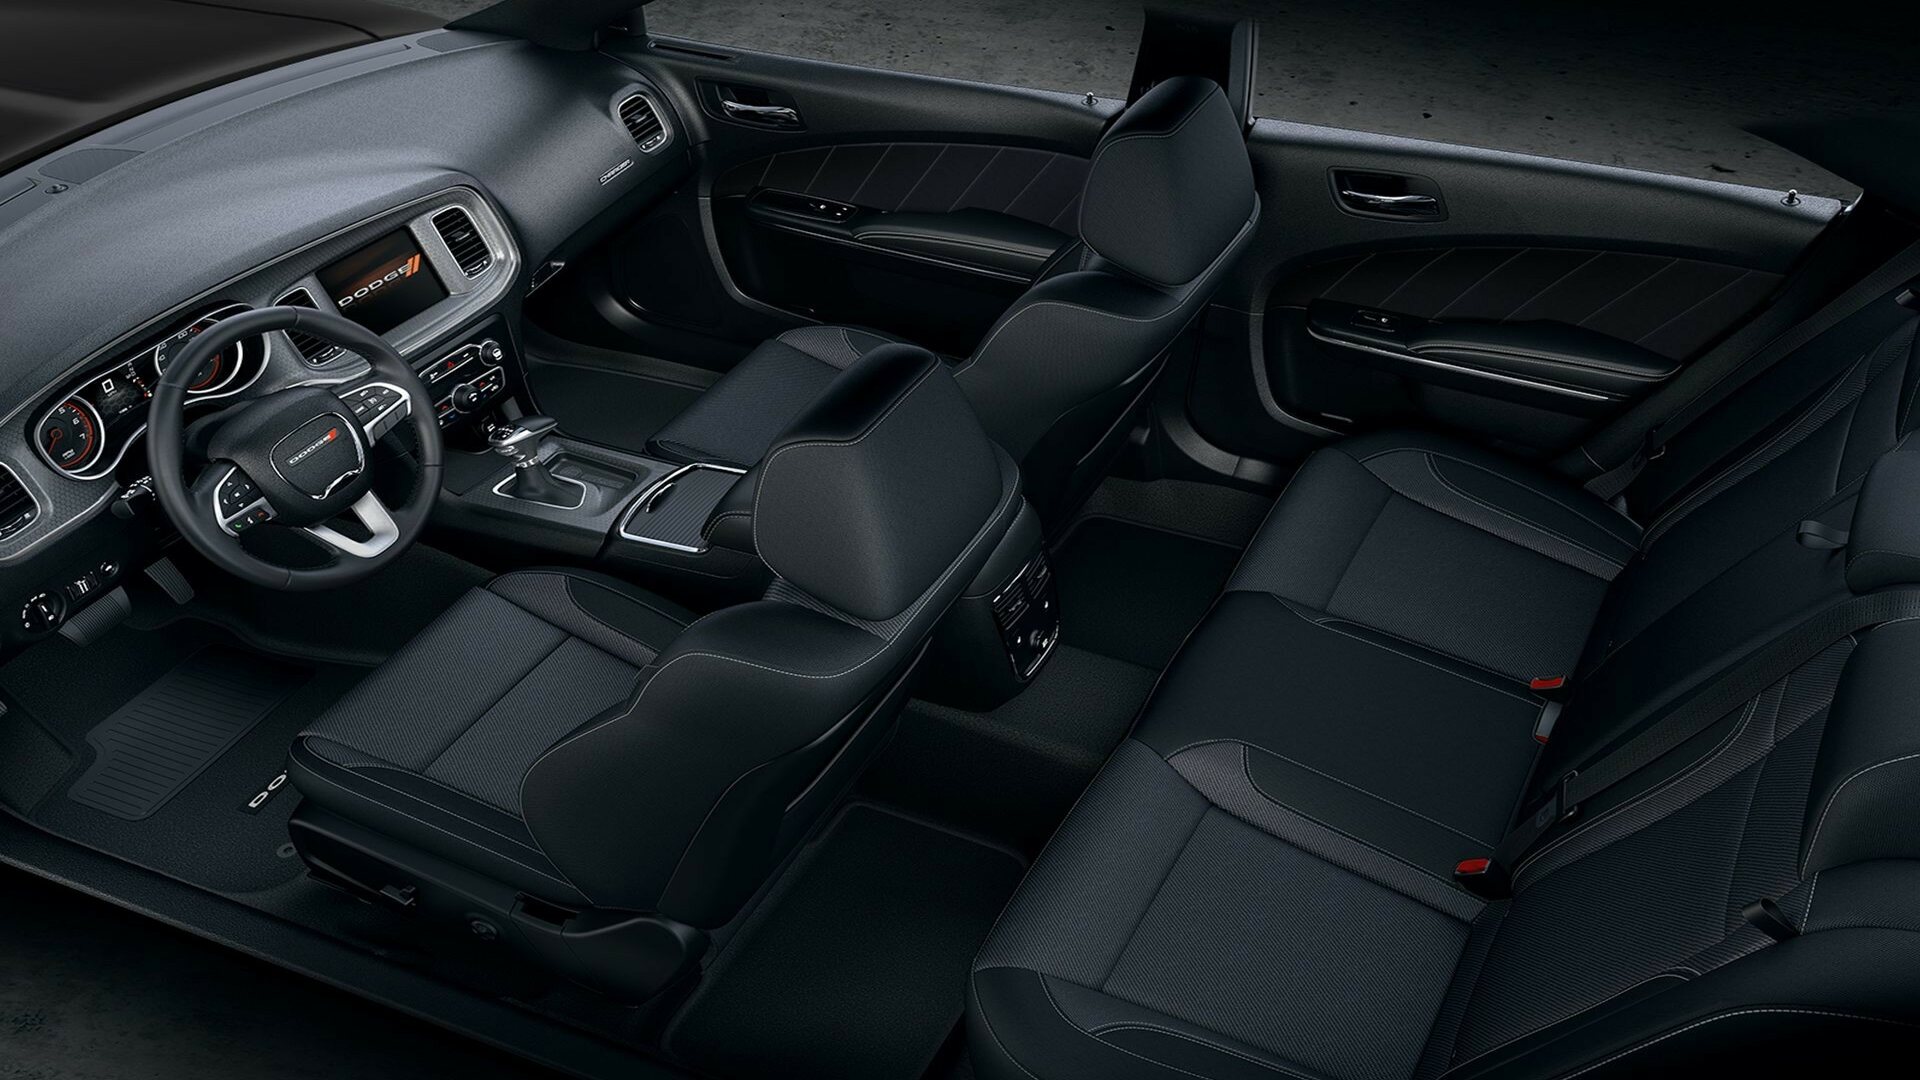 Interior Of Dodge Charger 2019 (Credits Dodge)